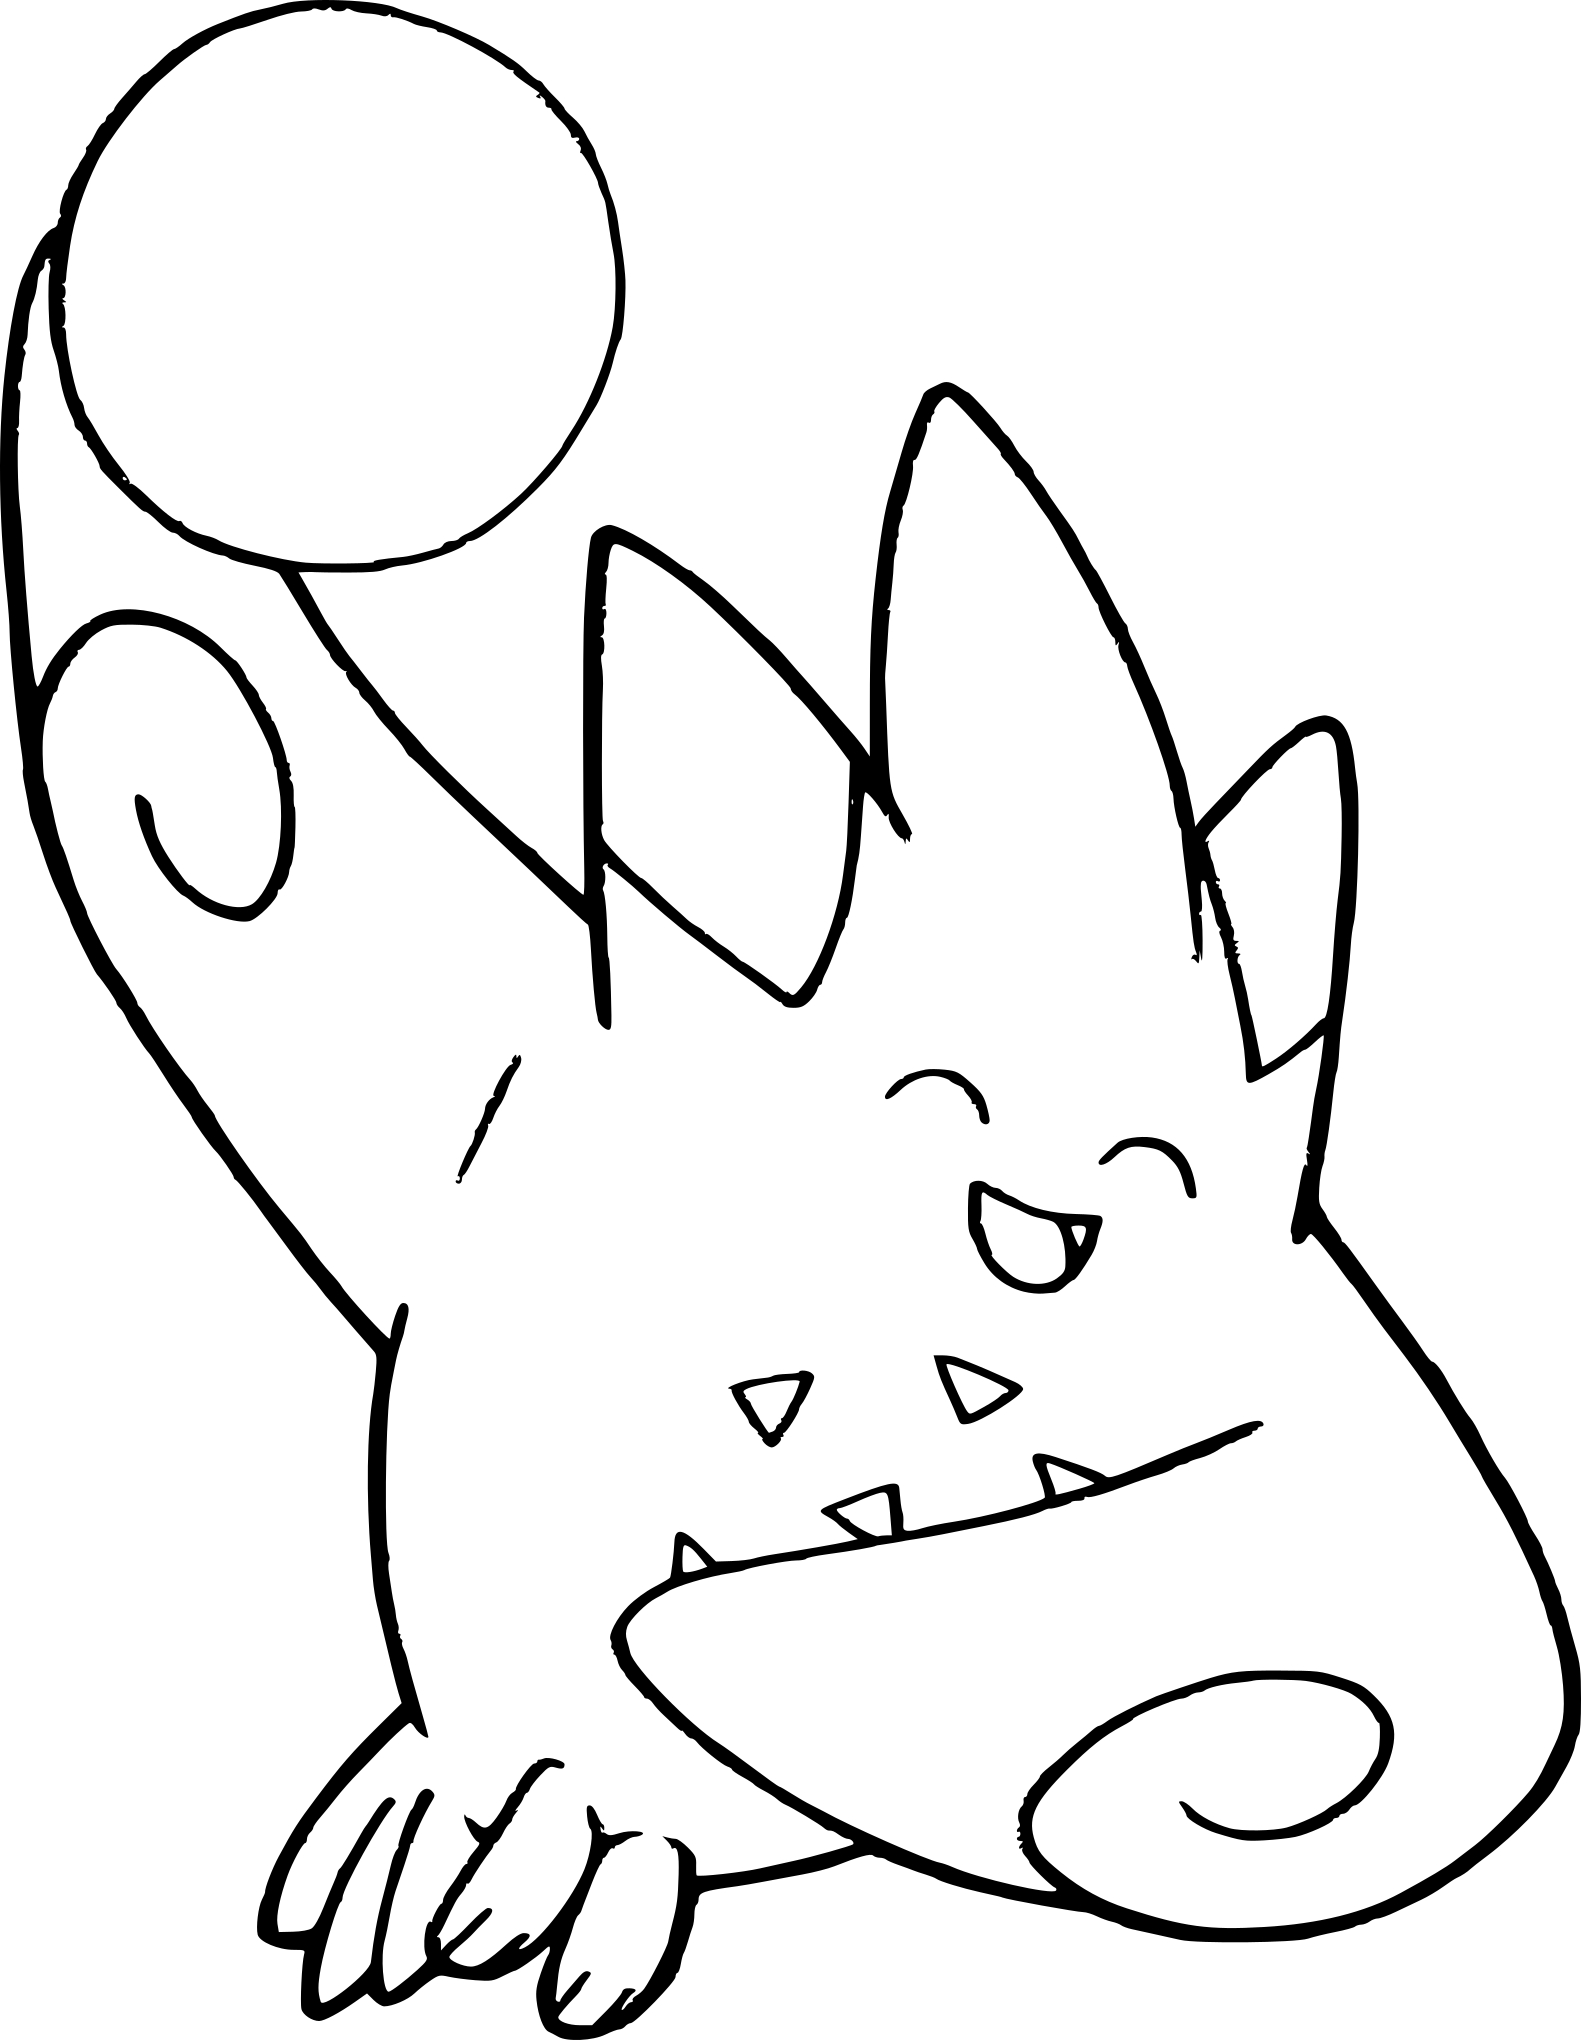 Pokemon Togekiss coloring page